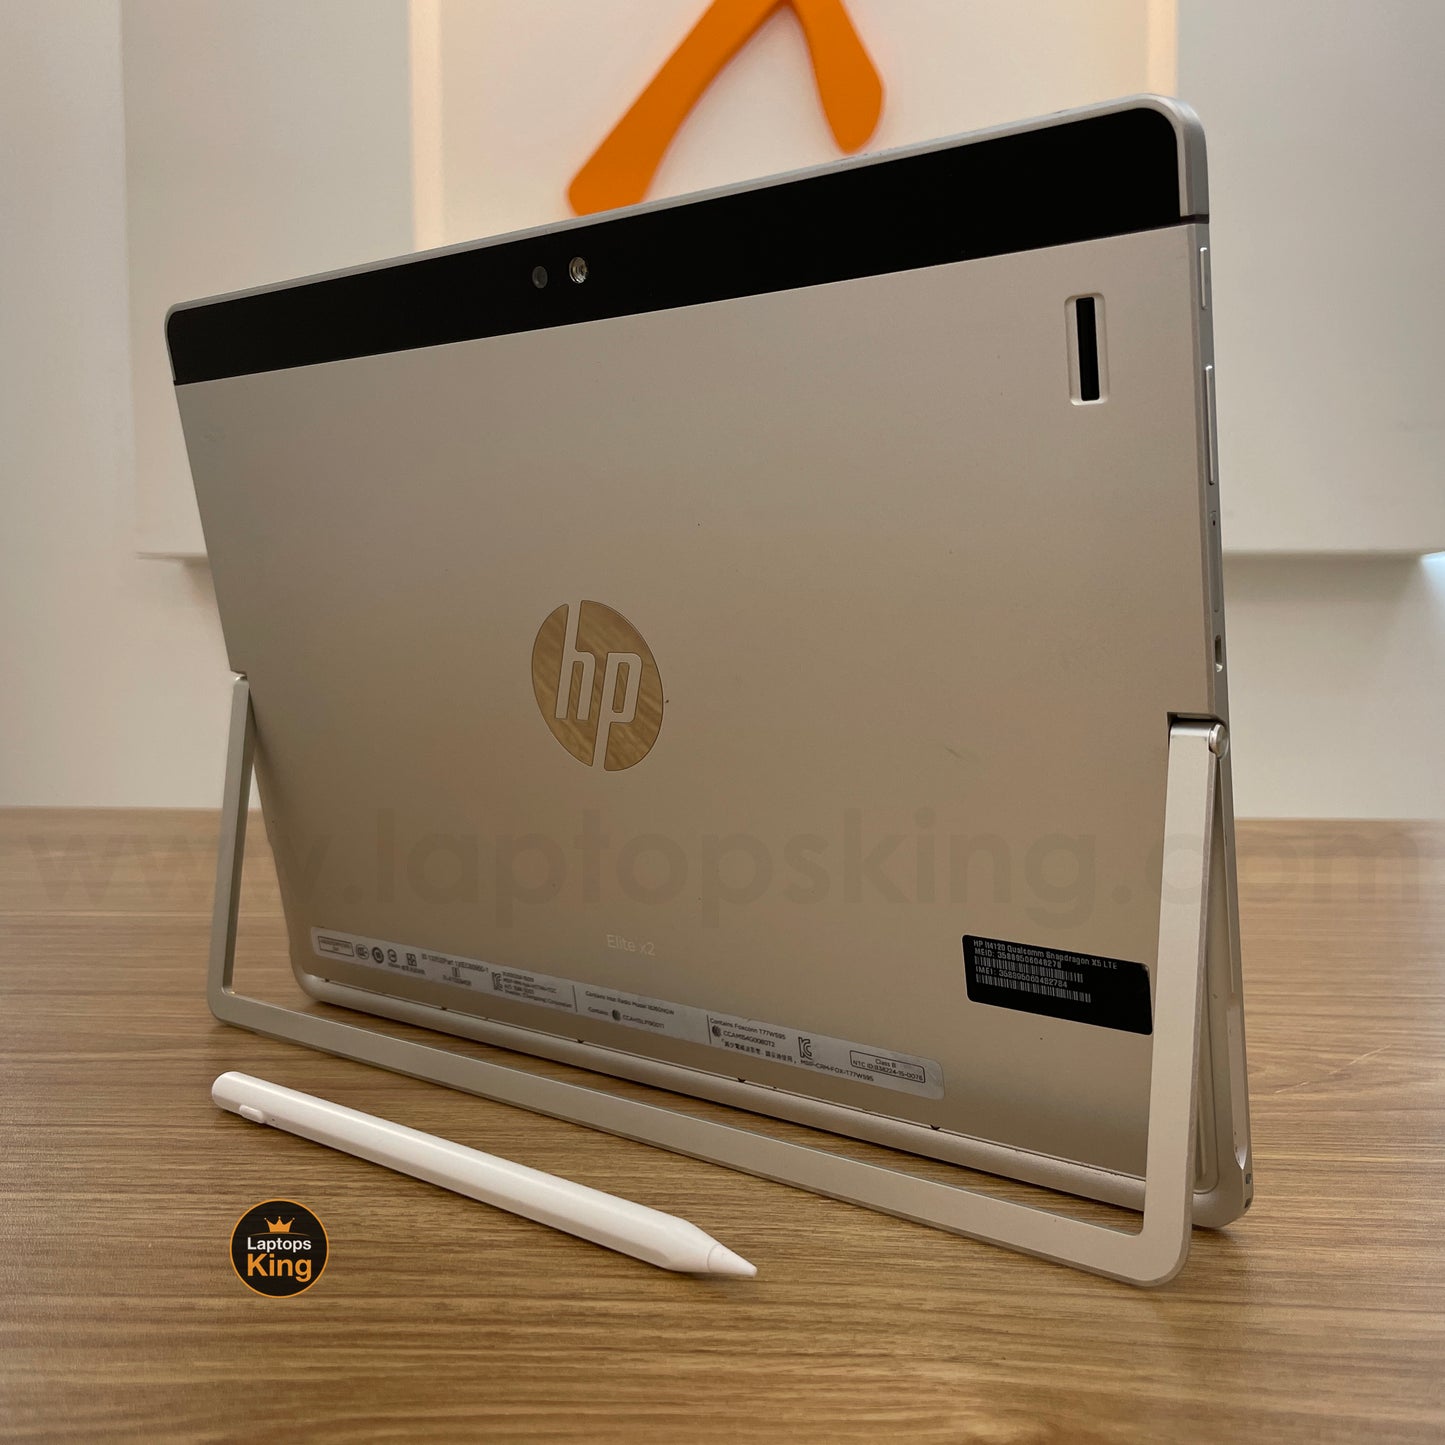 HP Elite X2 1012 2in1 Core M7-6Y75 Touchscreen With Pen Detachable Laptop (Used Very Clean) Computer for sale Lebanon, laptop in Lebanon, laptop for sale Lebanon, best programming laptop, laptop for sale in Lebanon, laptops for sale in Lebanon, laptop for sale in Lebanon, buy computer Lebanon, buy laptop Lebanon.